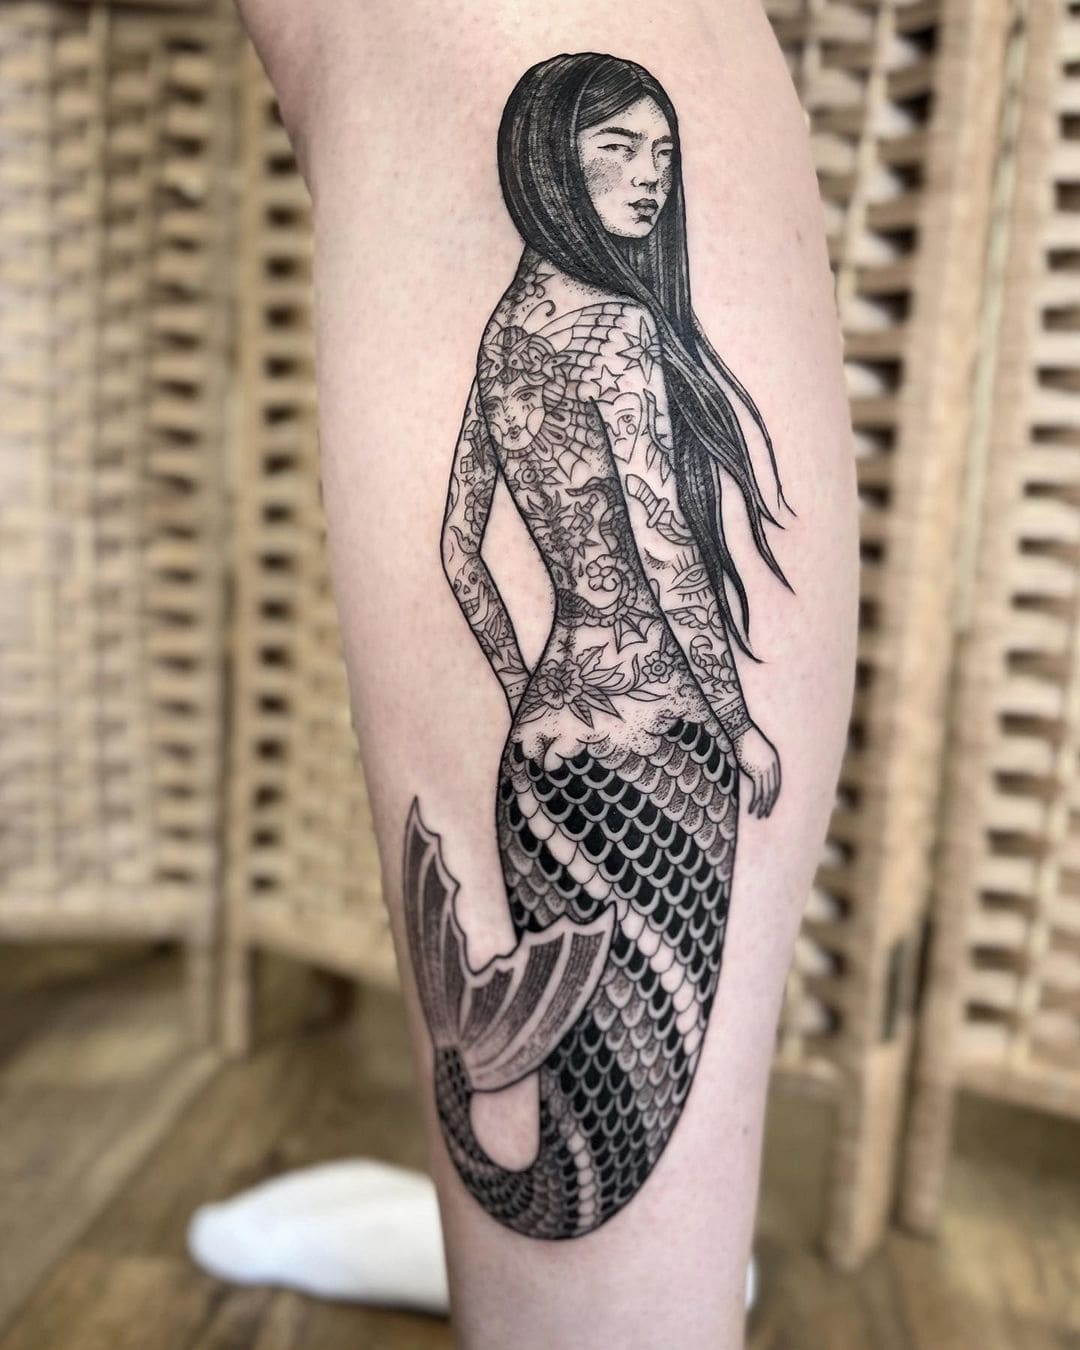 Steal the Most Wanted Mermaid Tattoo Ideas | Mermaid tattoo, Mermaid tattoo  designs, Trendy tattoos